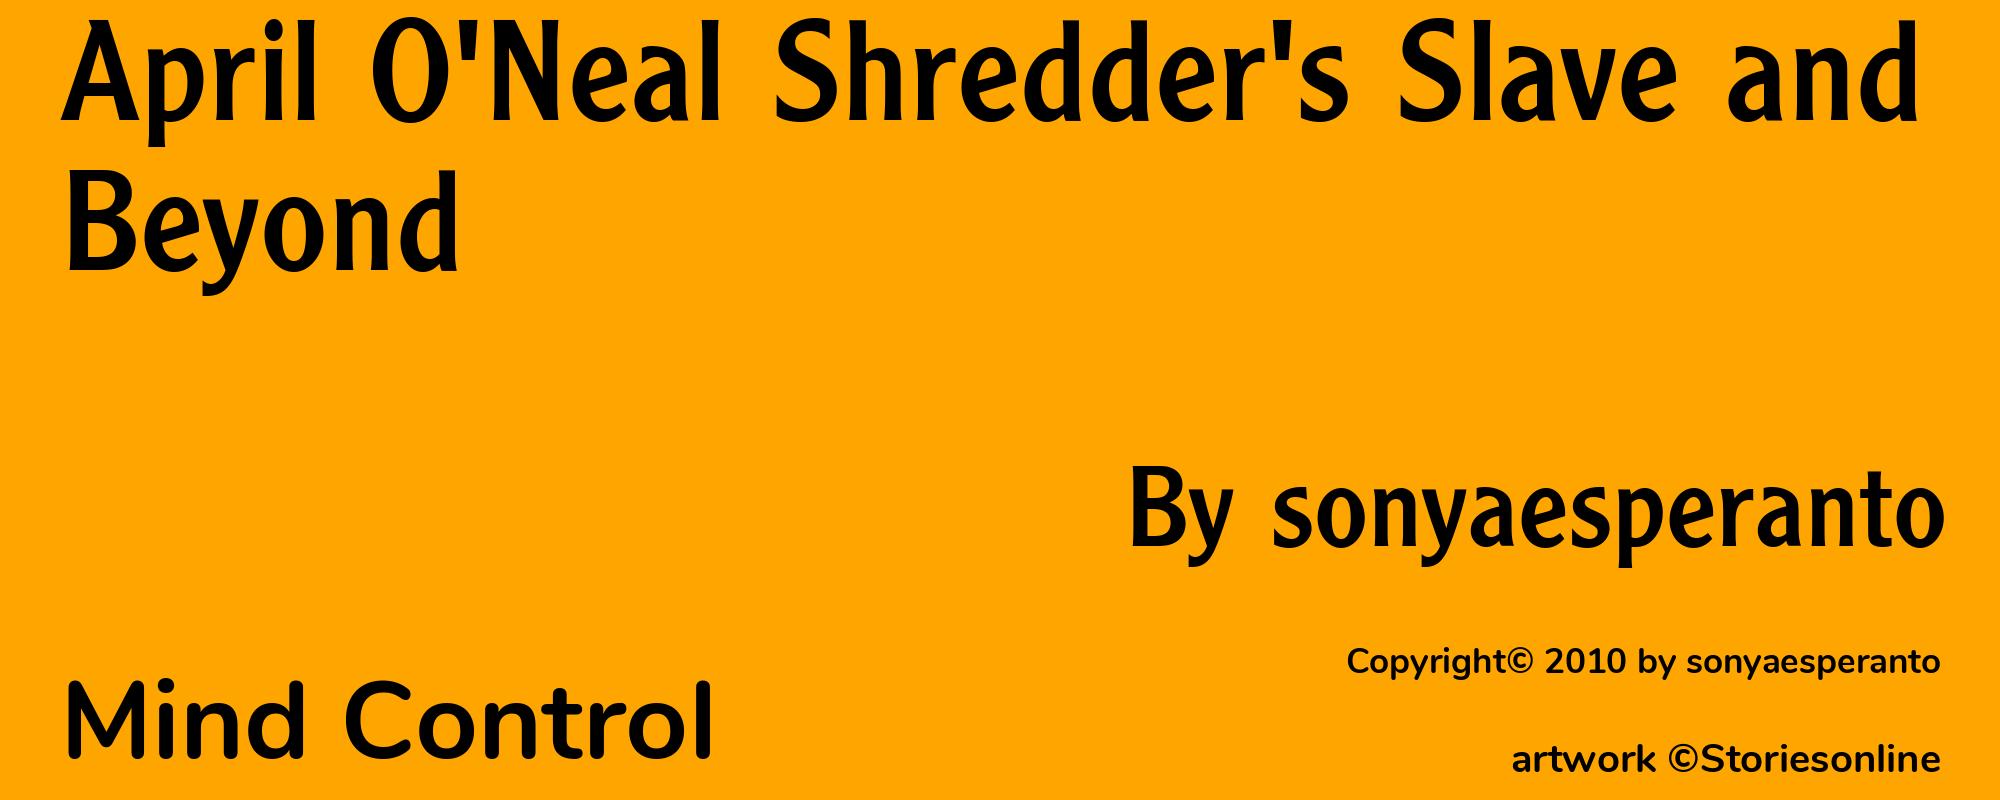 April O'Neal Shredder's Slave and Beyond - Cover